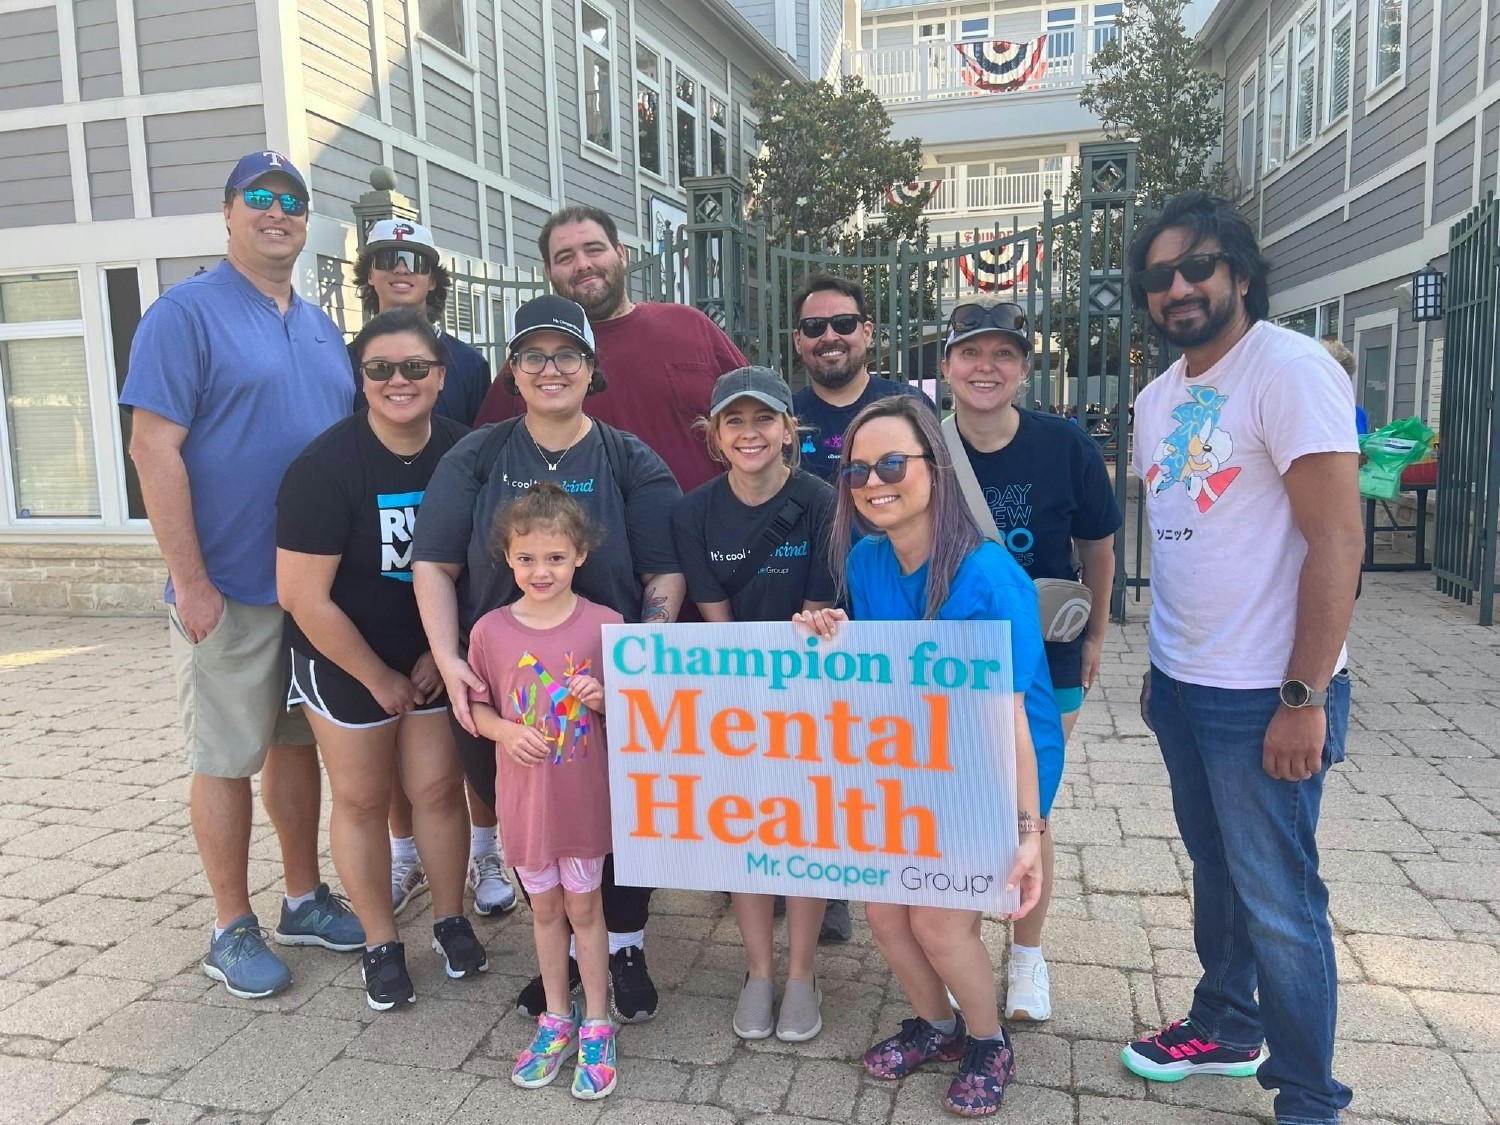 Mr. Cooper Group team members attended a walk to raise awareness  for mental health.